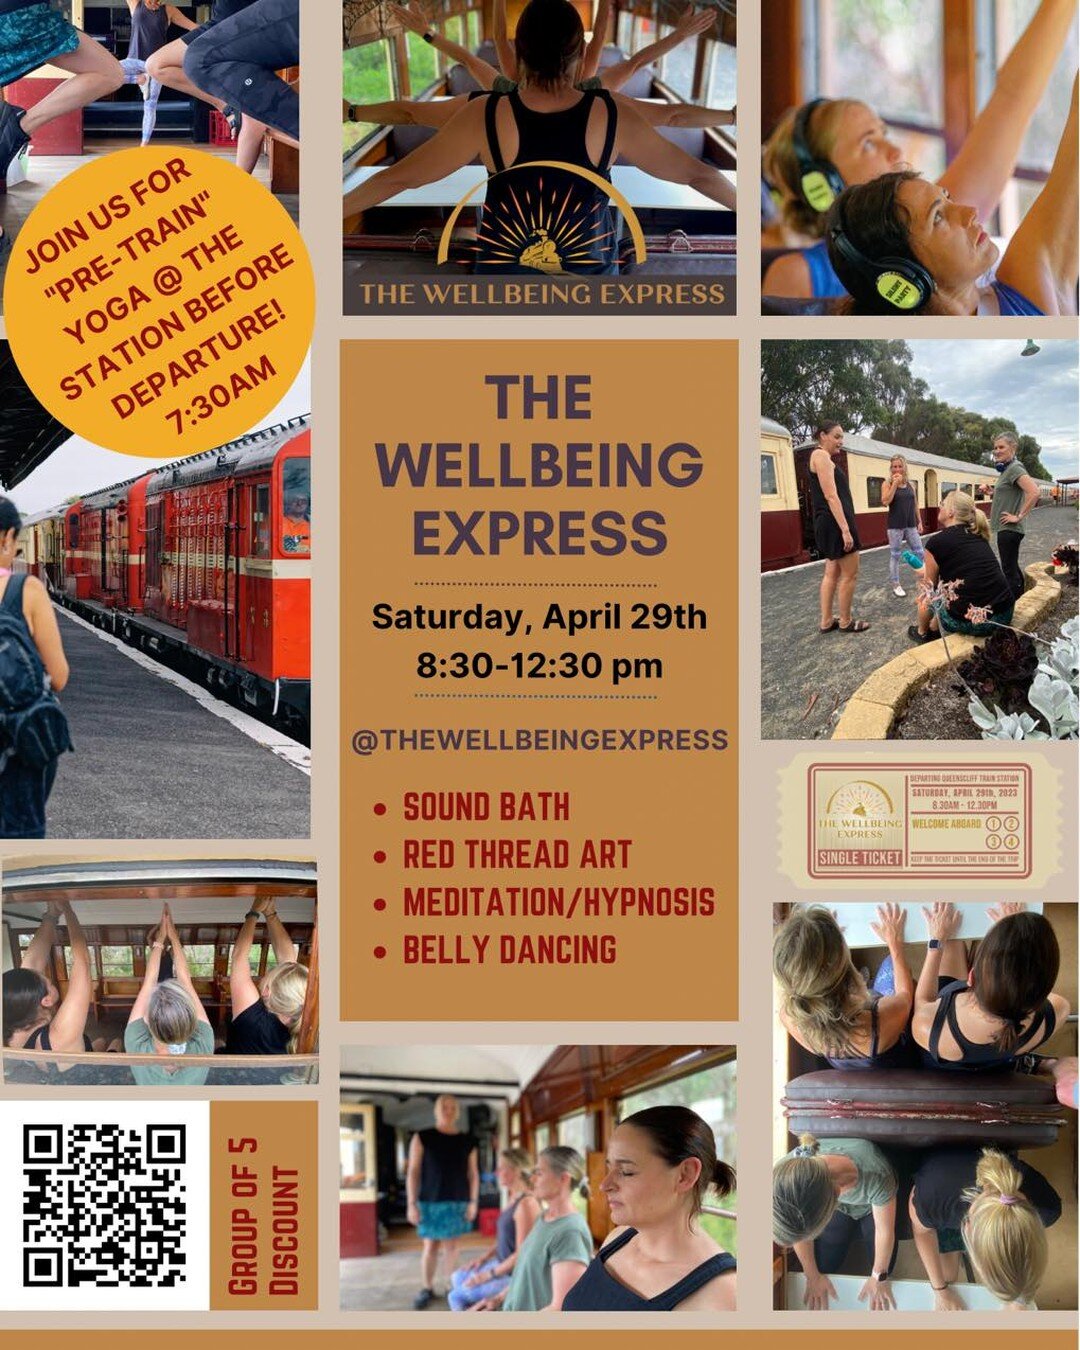 What you need to know:
Climb aboard the Wellbeing Express
On Saturday 29th April

7:30am Pre-train Yoga,
8:30am train check in,
Move through 4 carriages,
Middle-eastern (belly) dancing,
Guided Meditation,
Red thread needlework,
Sound bath,

40 minute